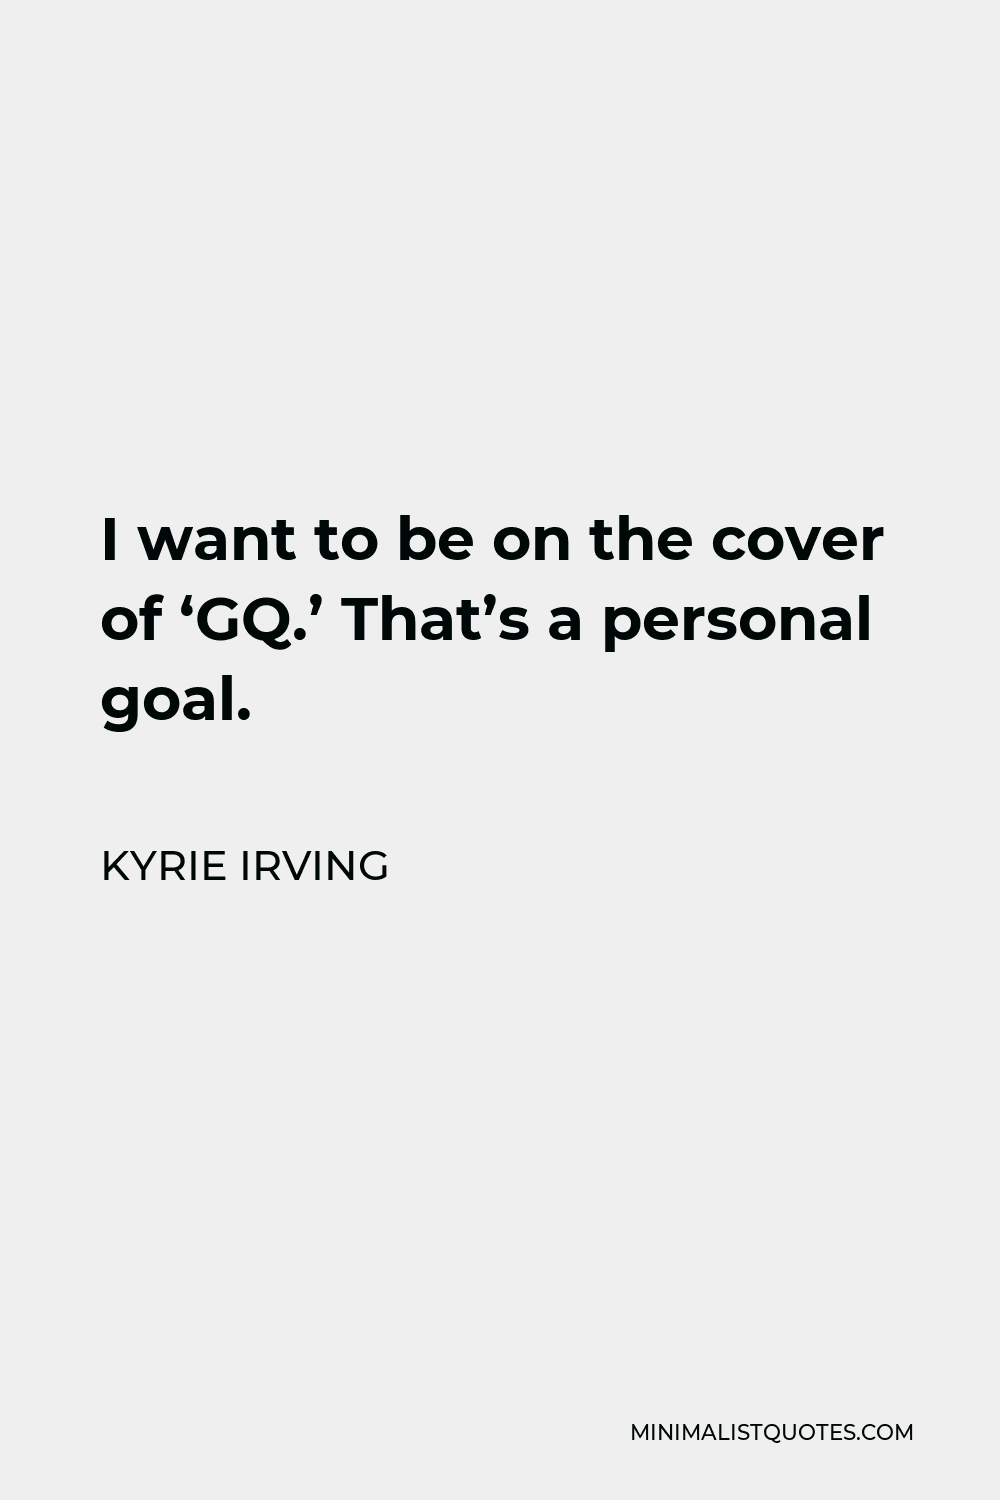 Kyrie Irving Quote - I want to be on the cover of ‘GQ.’ That’s a personal goal.